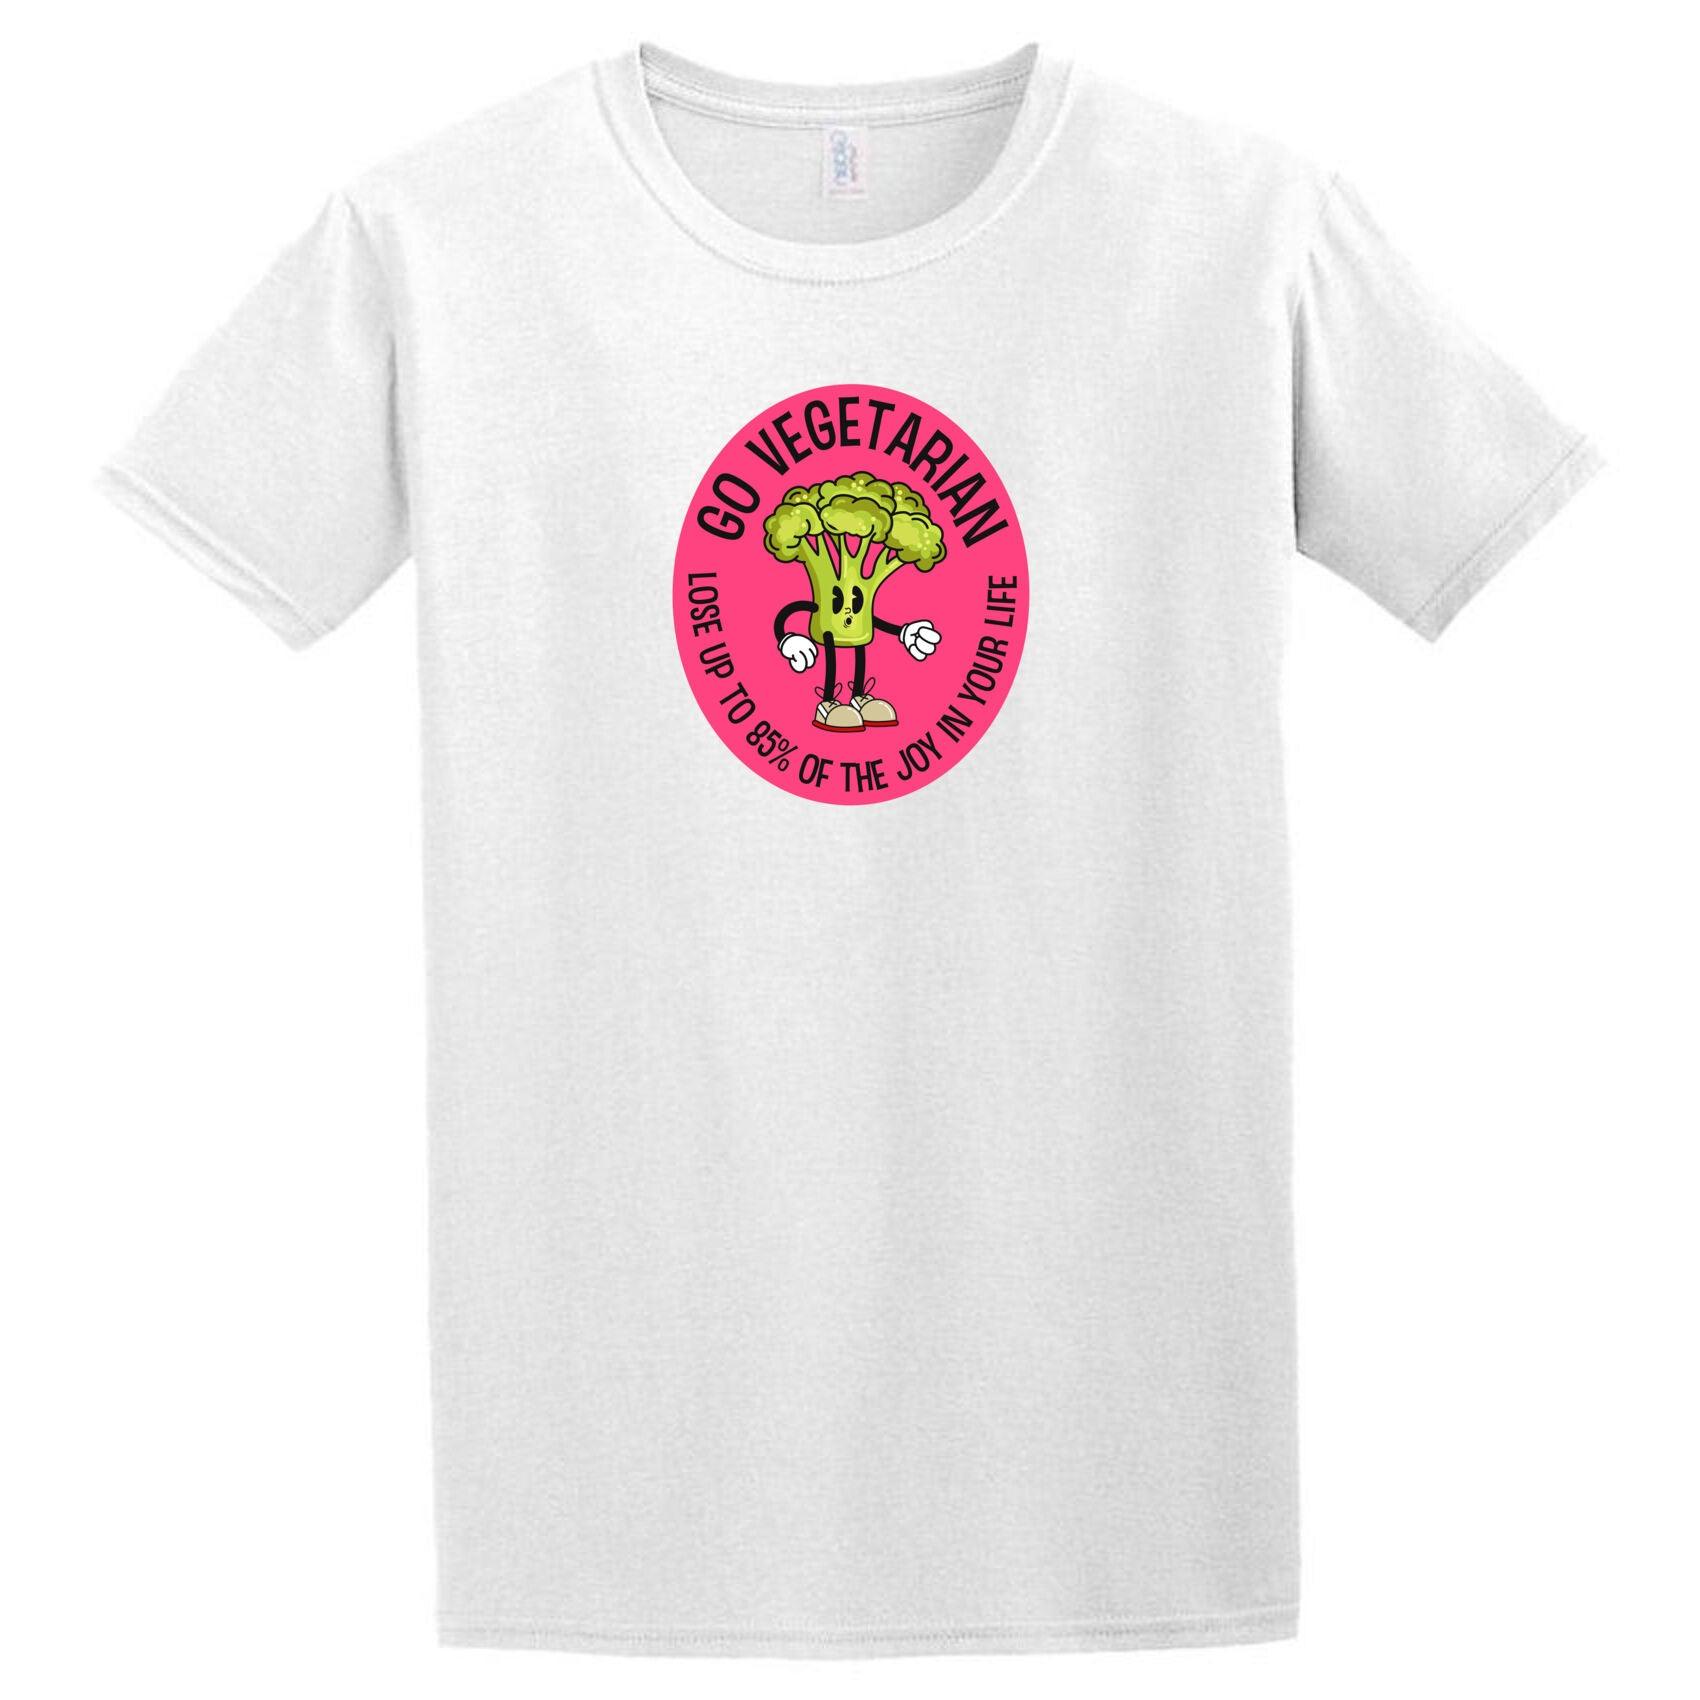 A white Joy In Life T-Shirt with a pink and yellow Twisted Gifts logo.